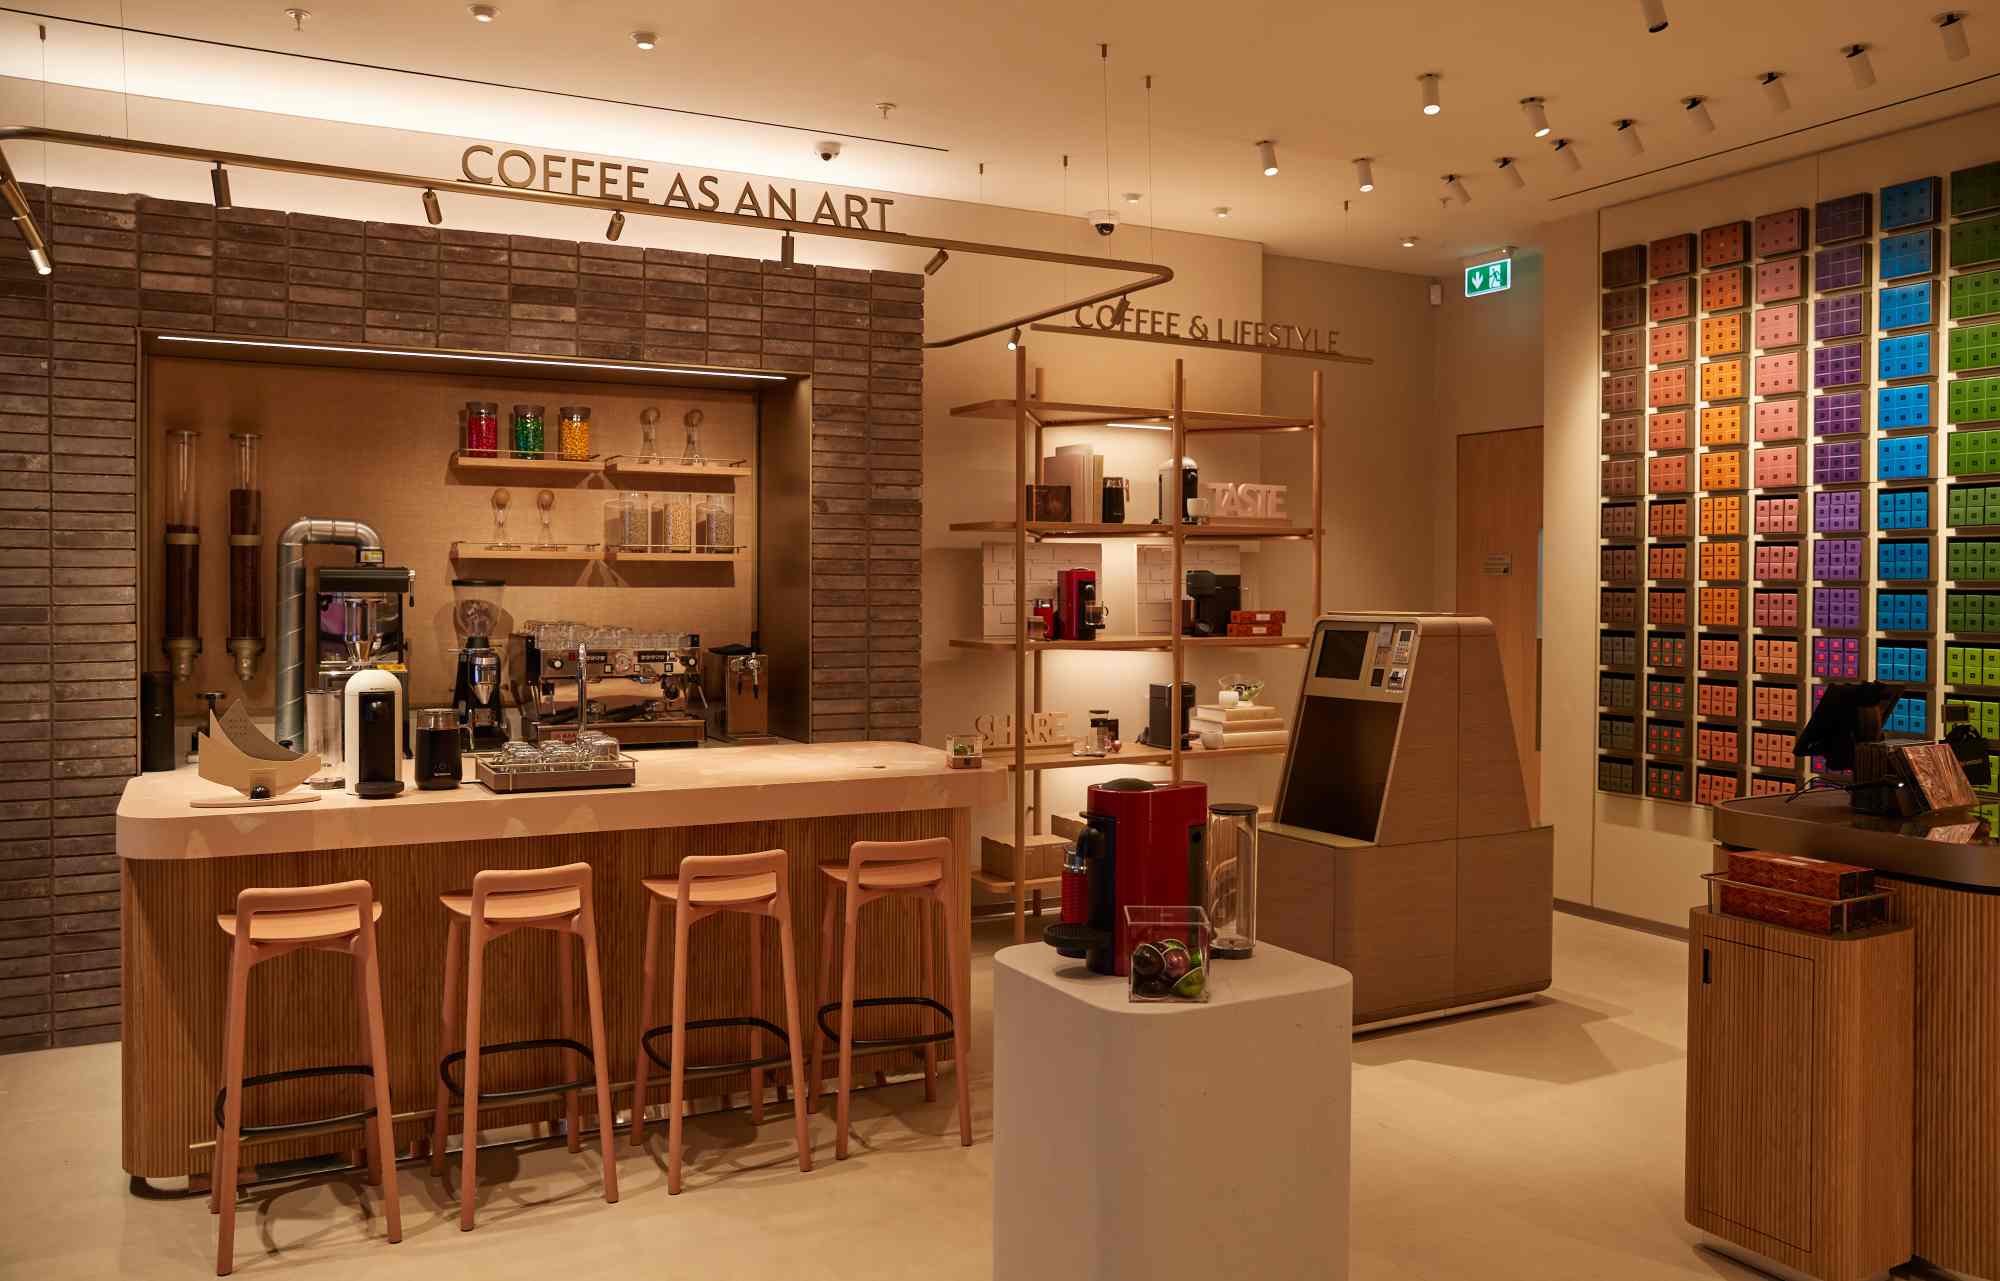 Nespresso's new experiential store has opened in Trinity Leeds